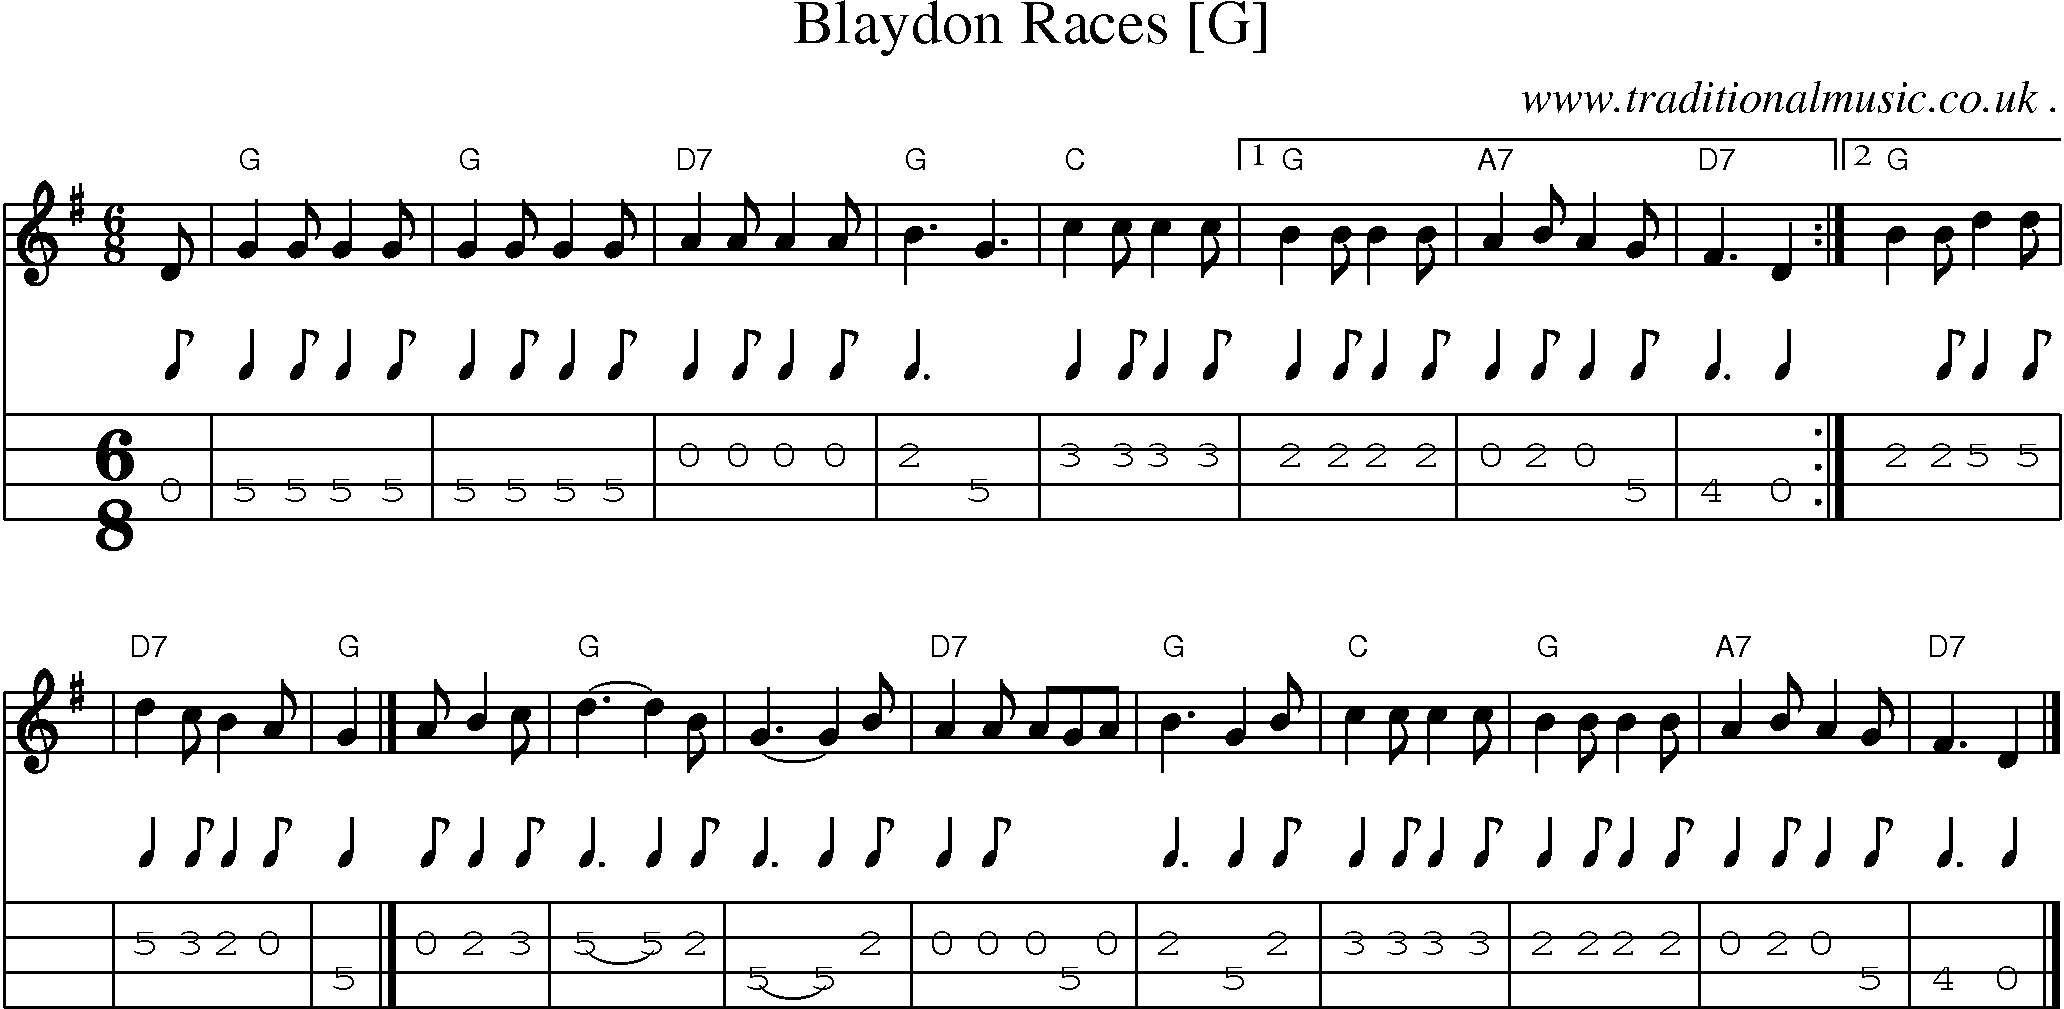 Sheet-music  score, Chords and Mandolin Tabs for Blaydon Races [g]